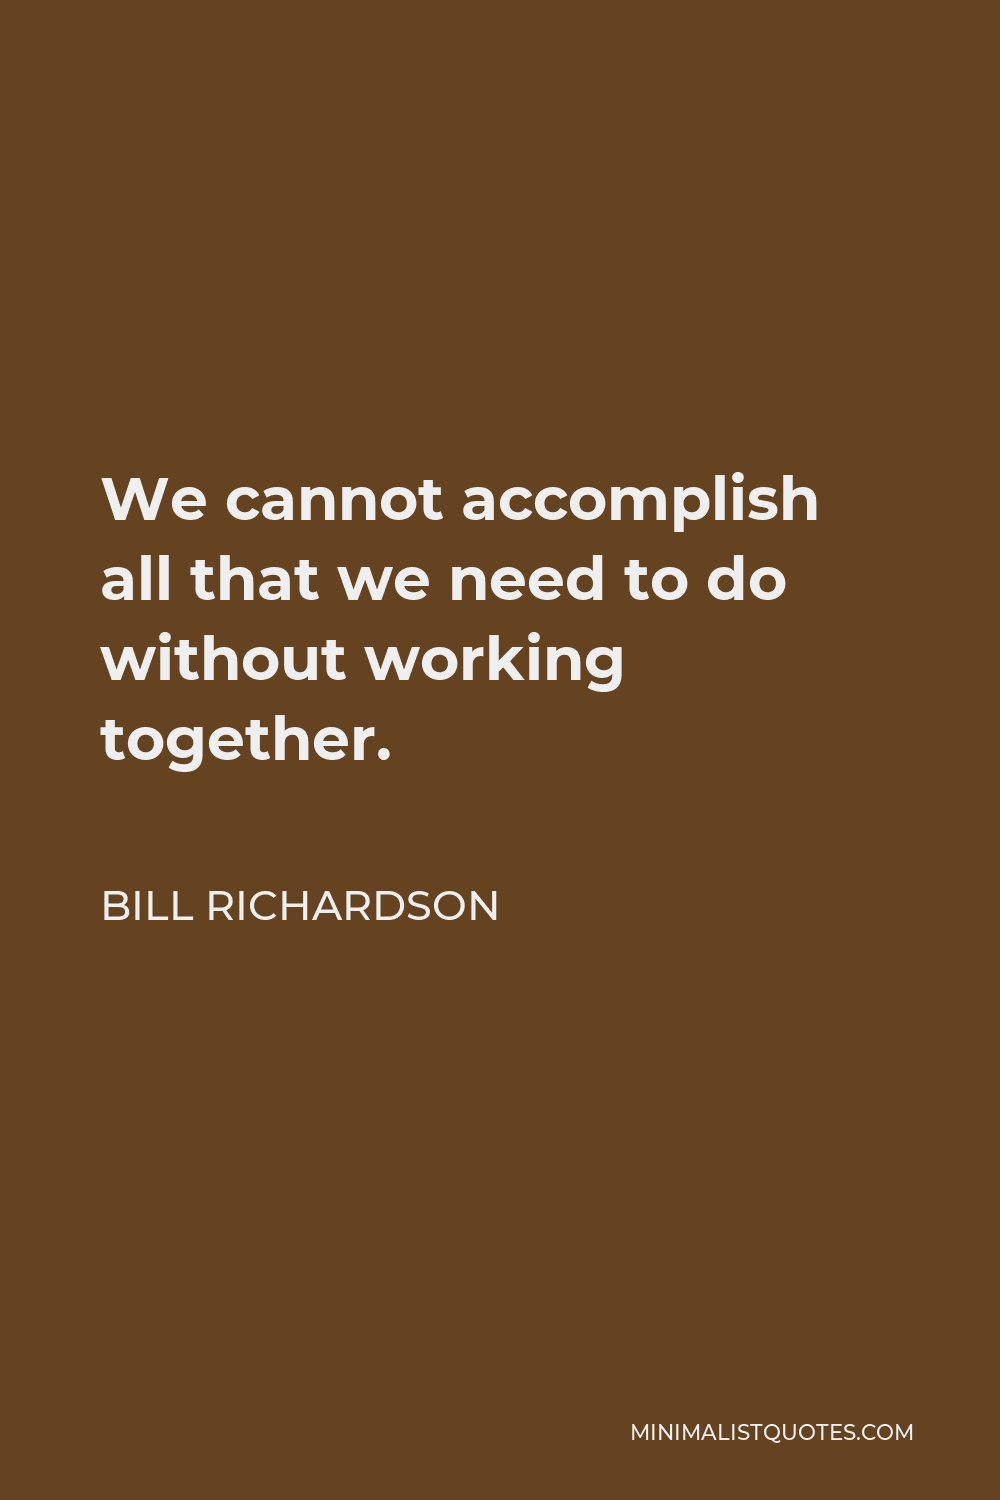 Bill Richardson Quote - We cannot accomplish all that we need to do without working together.